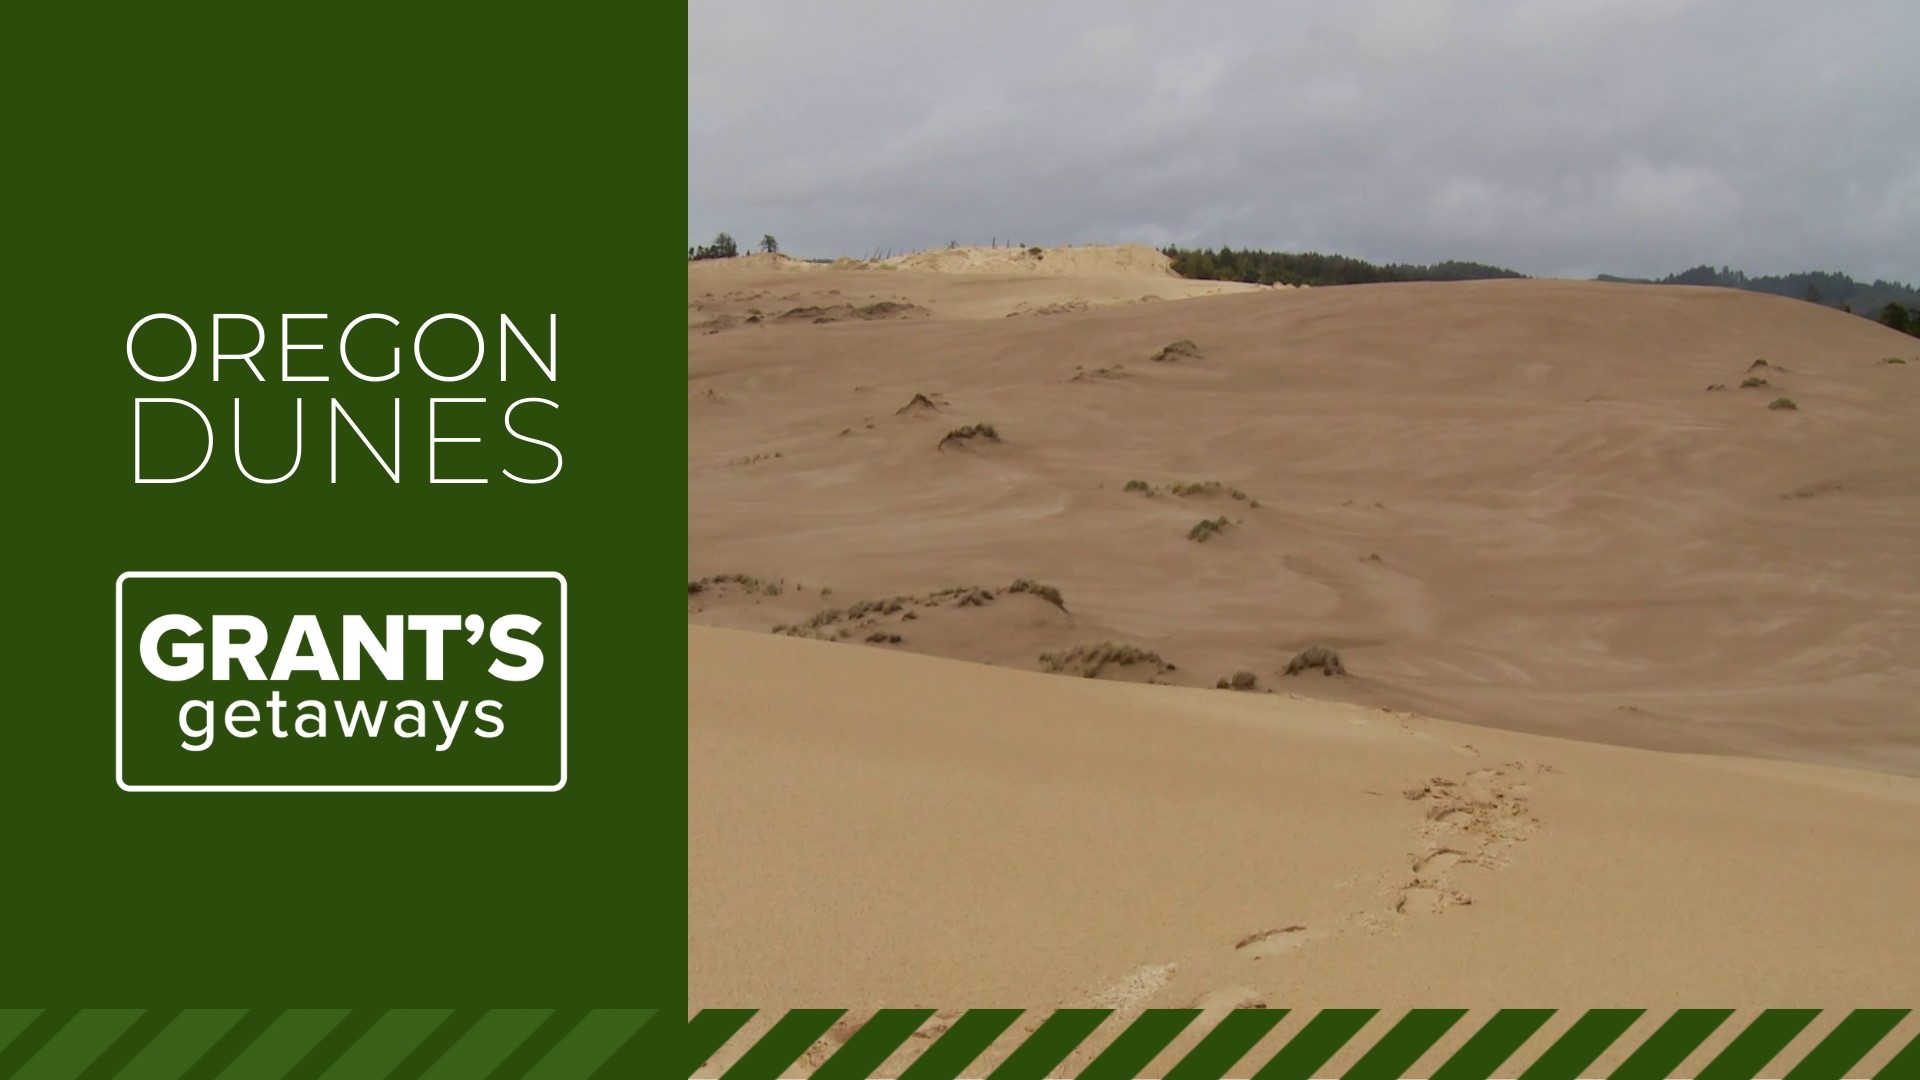 The Oregon Dunes National Recreation Area covers 42-miles from Florence to Coos Bay. It is an Oregon landmark for outdoor recreation.